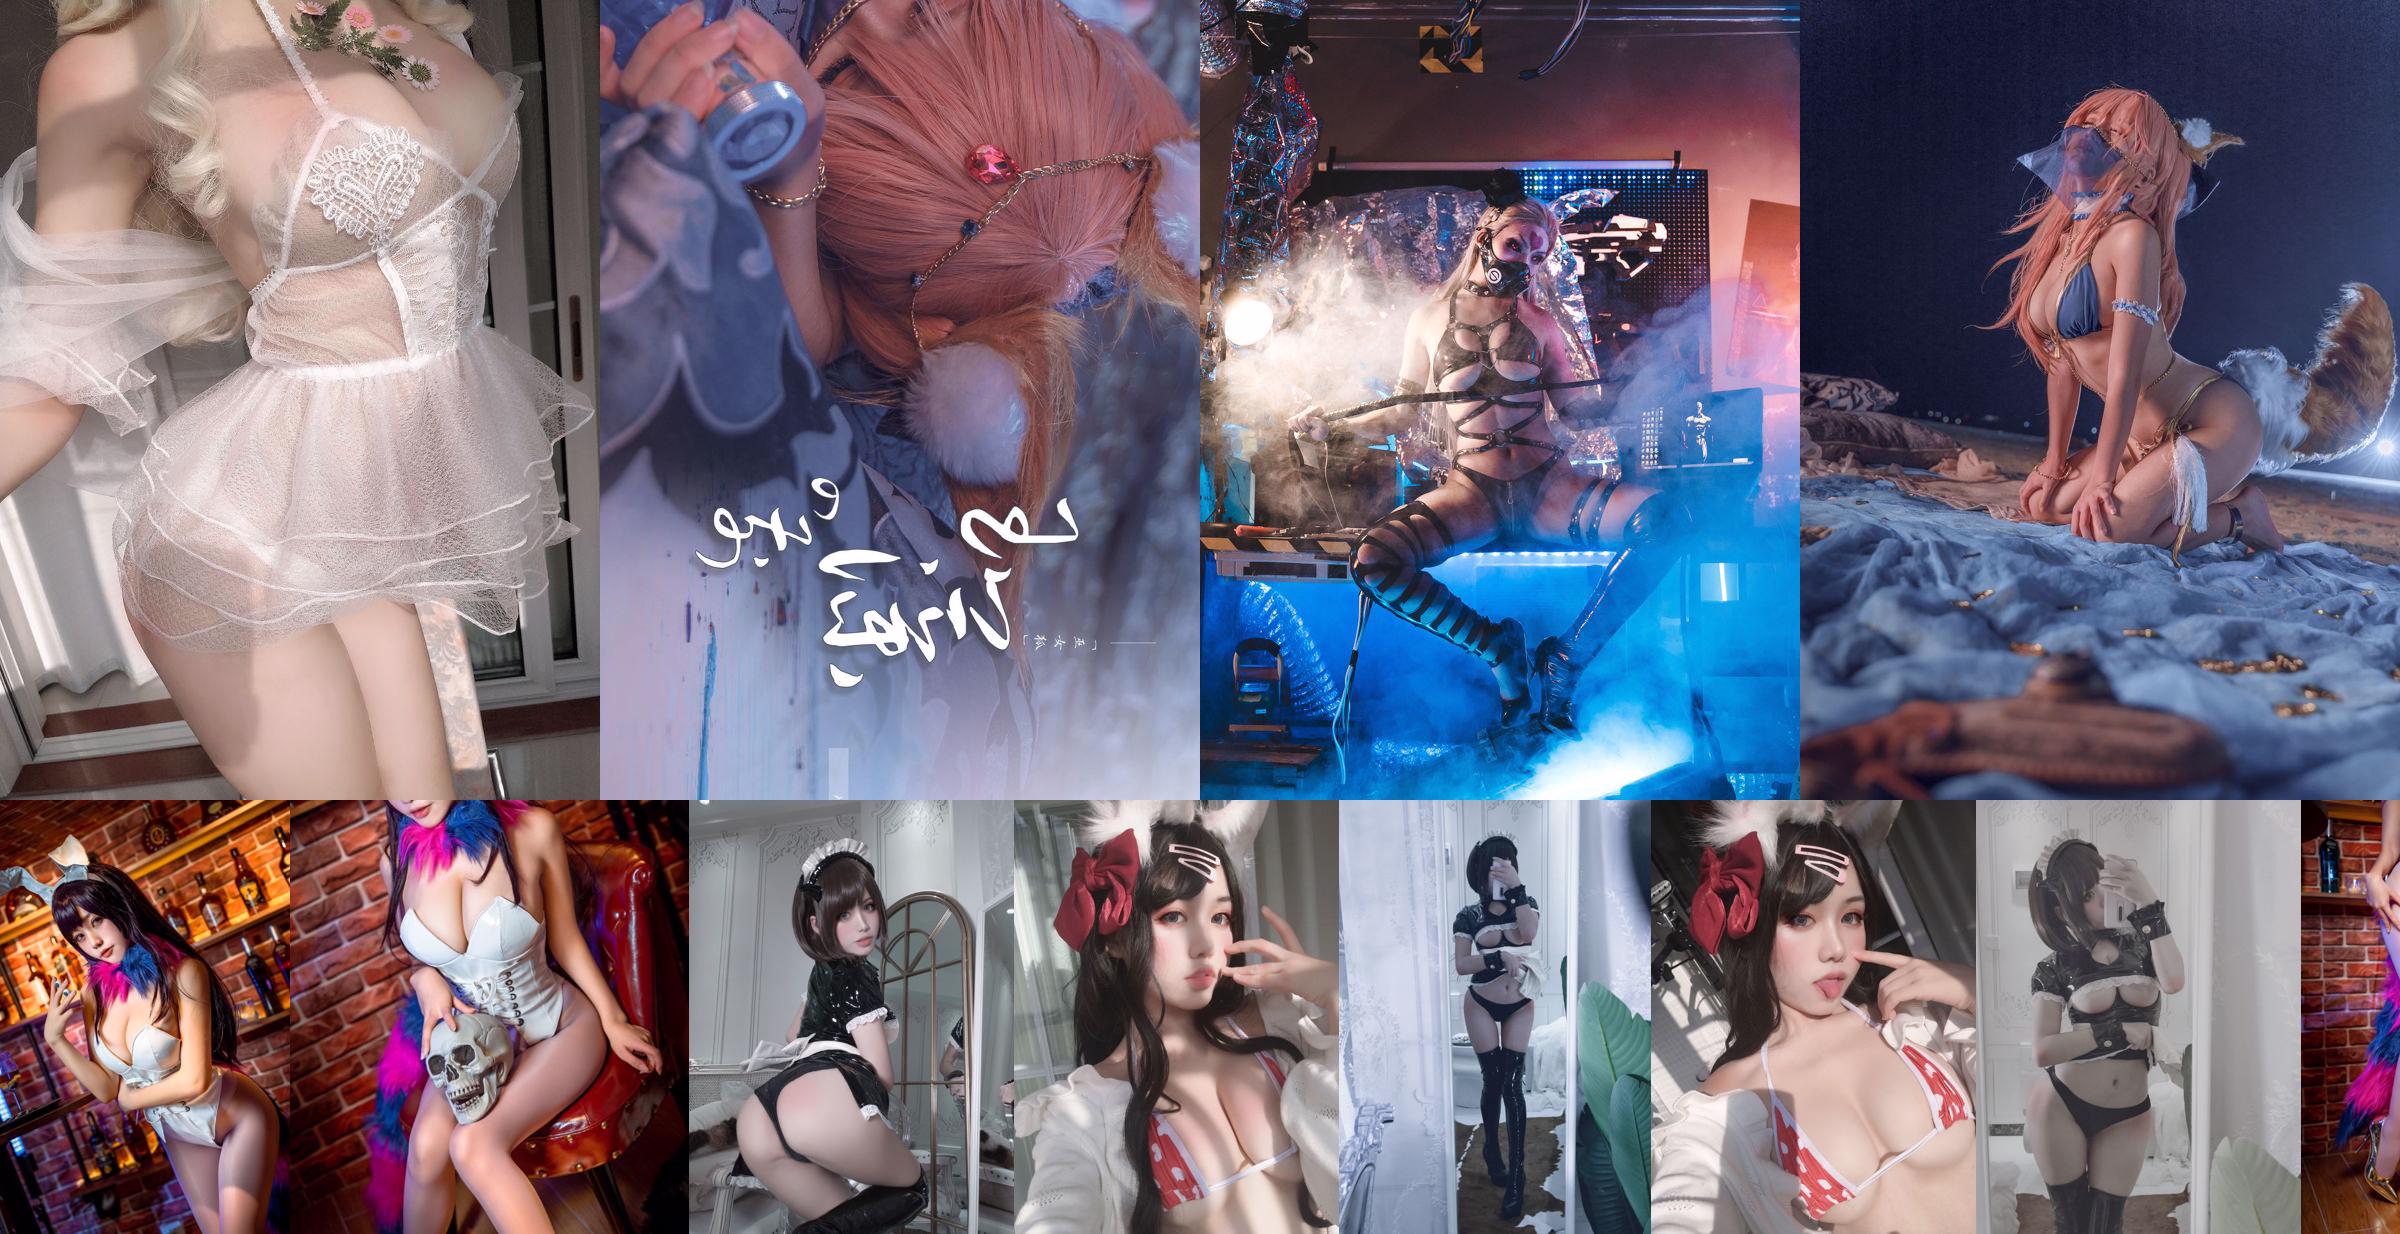 [Beauty Coser] "Breakfast Milk" with a smile No.111e80 Page 10